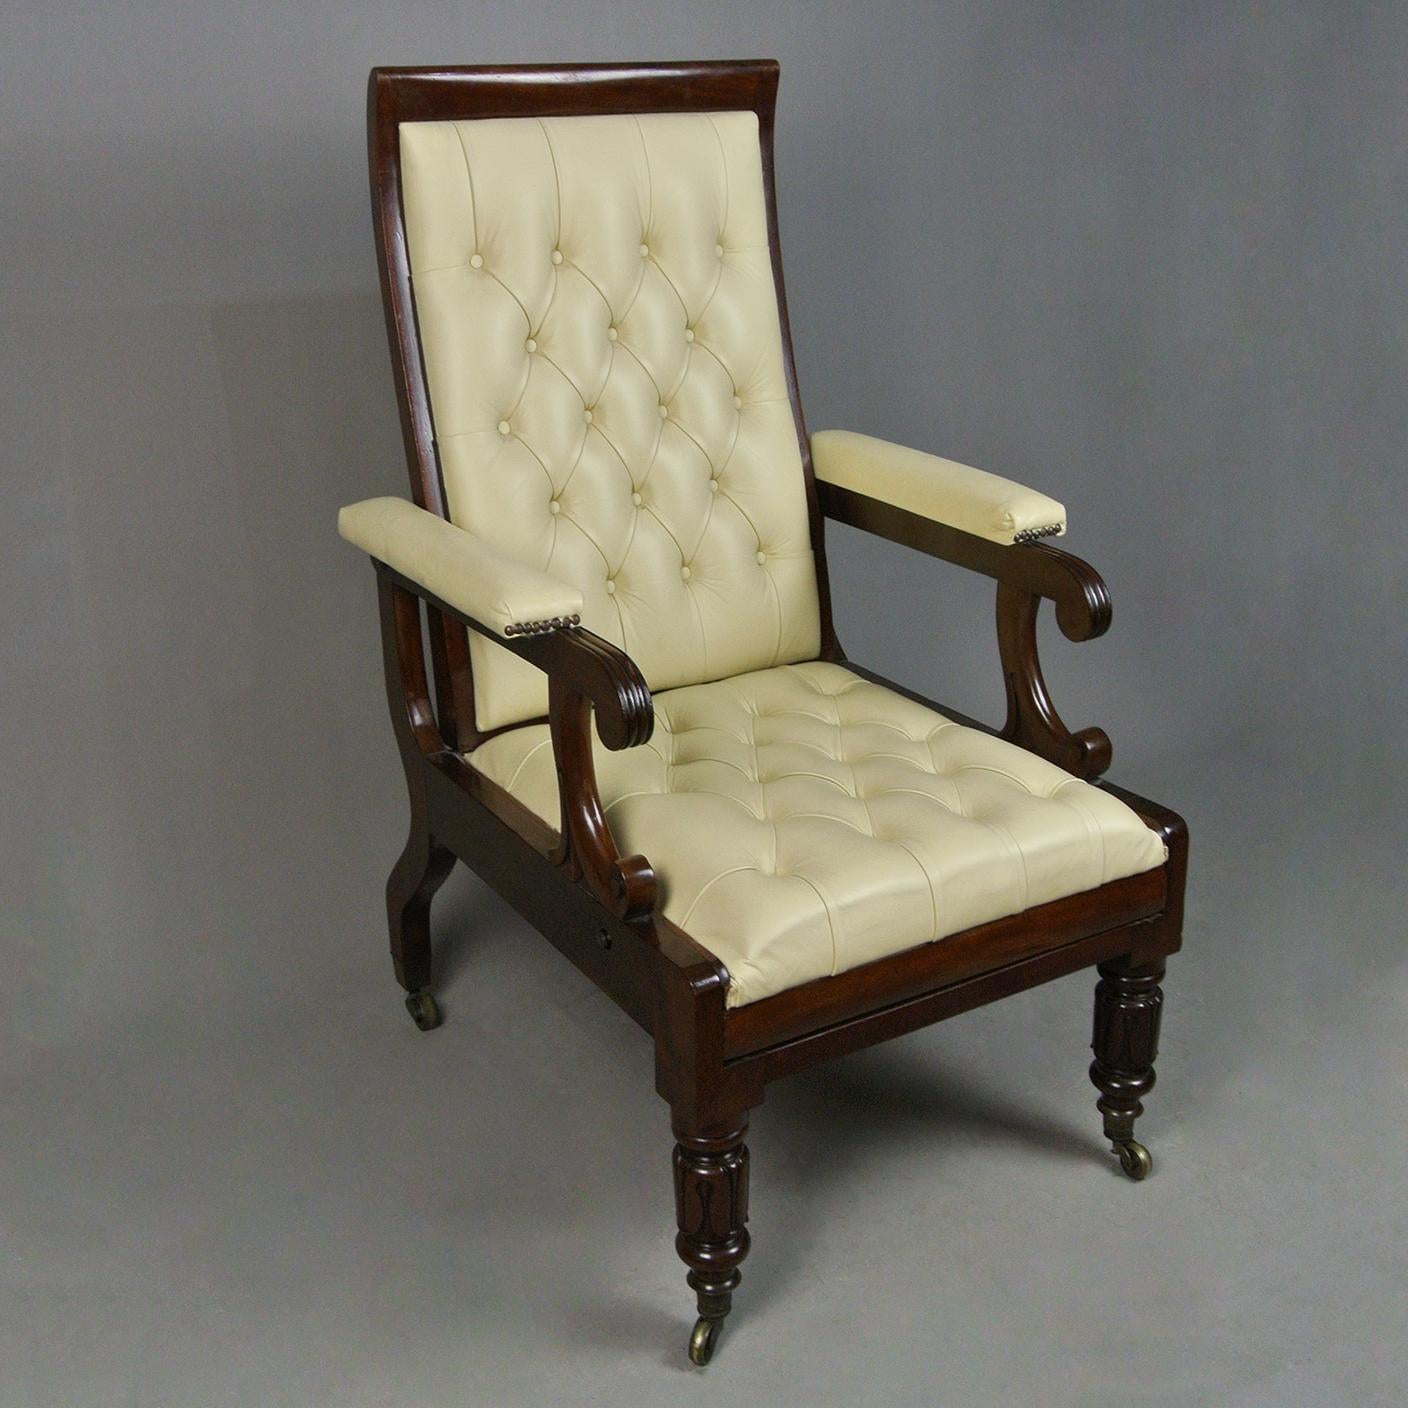 Regency Solid Mahogany ‘Daws Patent’ Reclining Chair c. 1830 For Sale 1